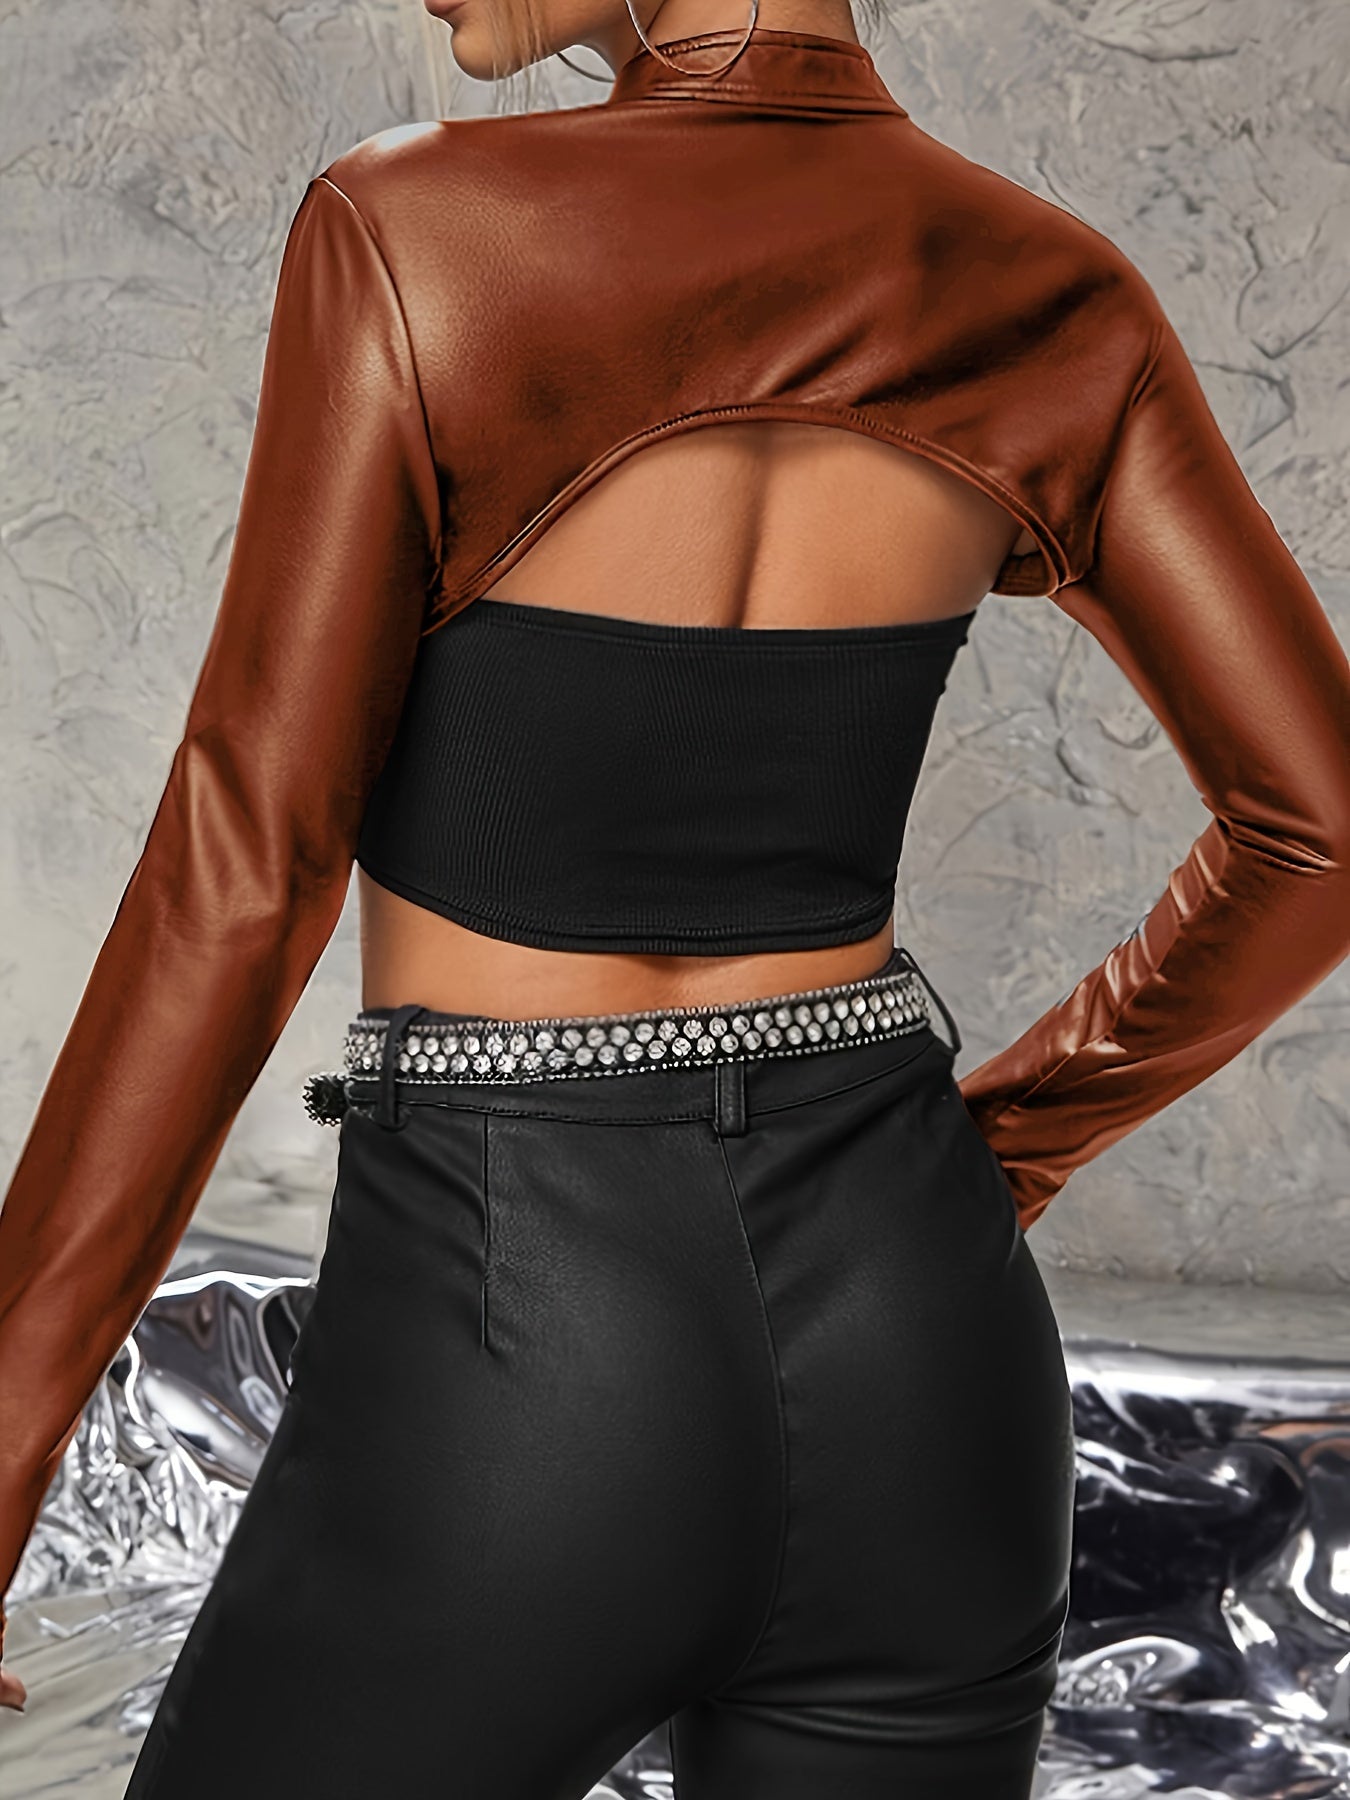 xieyinshe  Solid Faux Leather Crop Top, Vintage Long Sleeve Crop Top For Spring & Fall, Women's Clothing